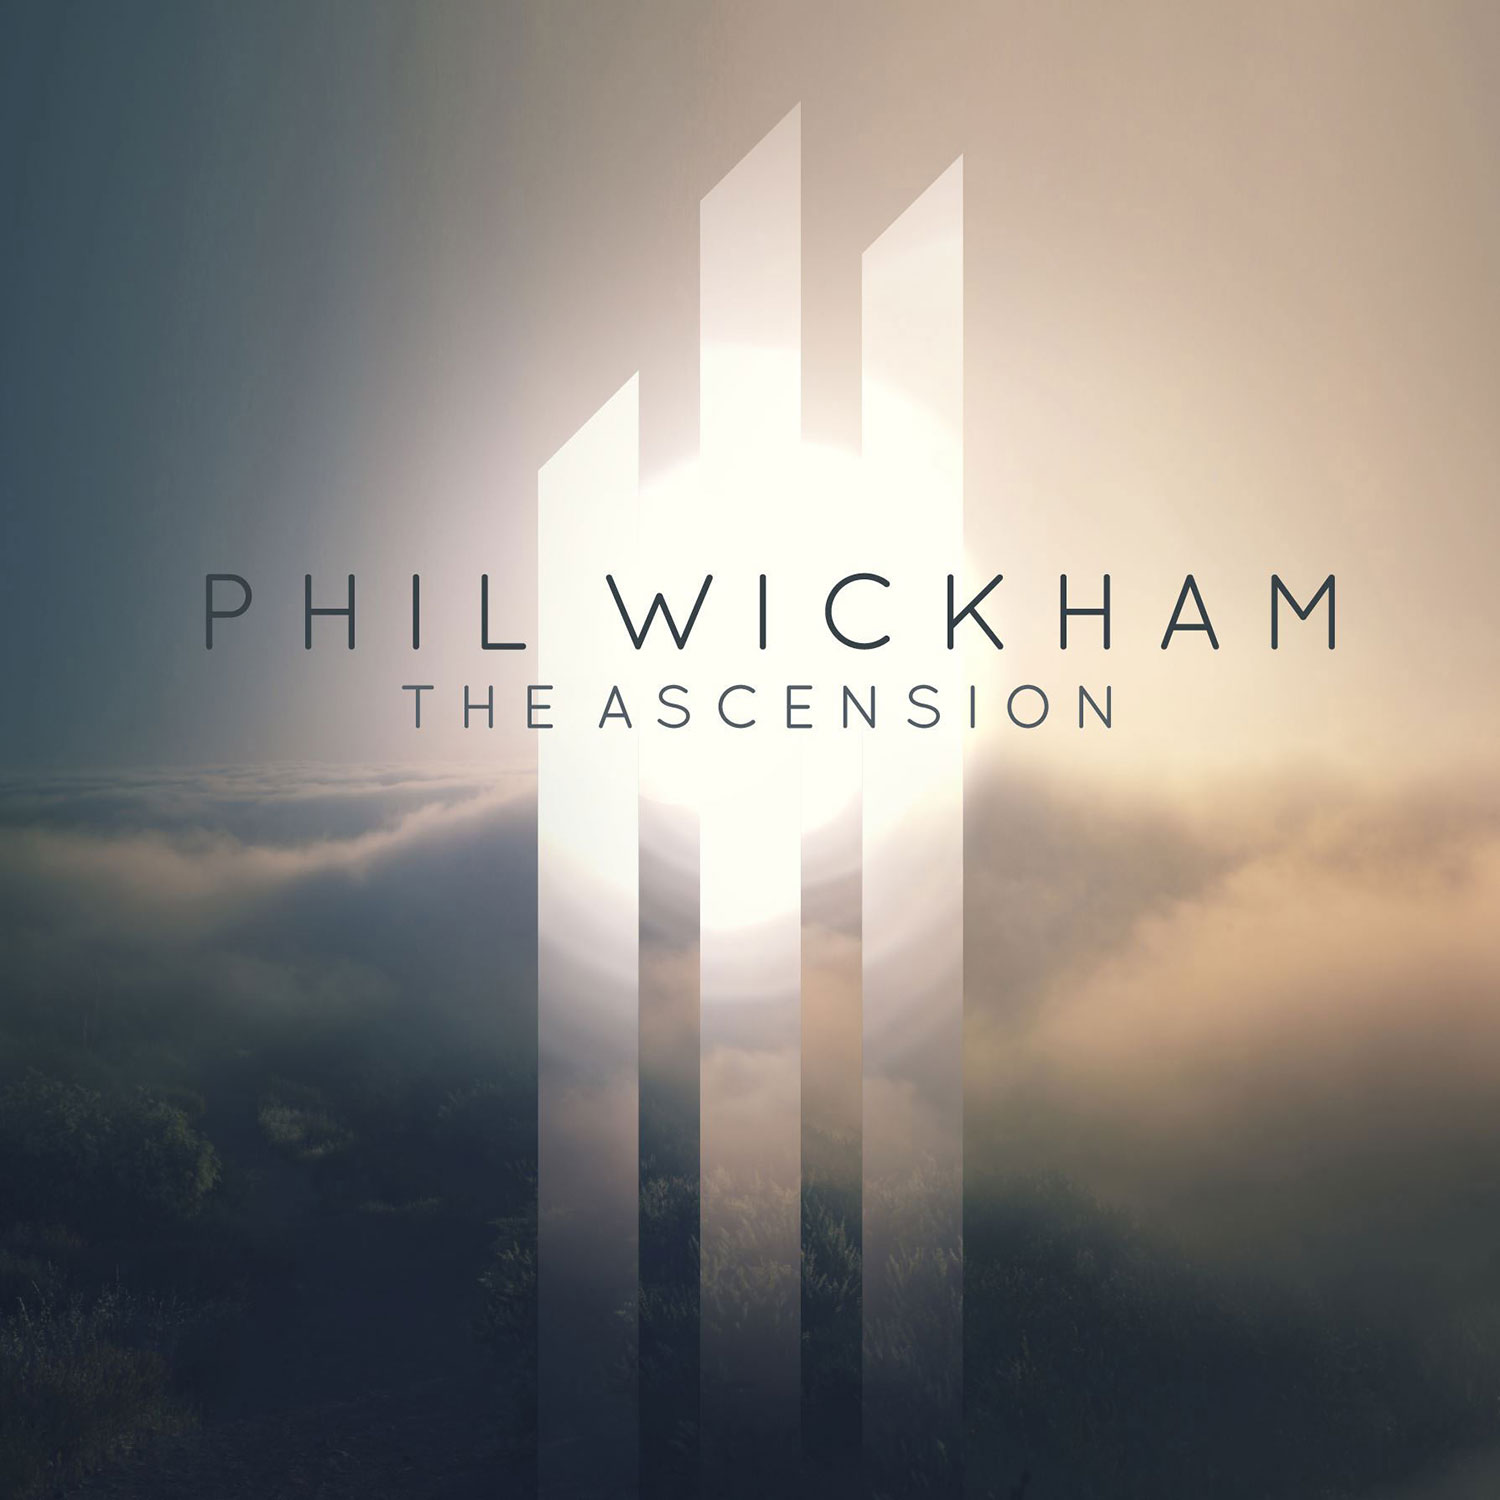 The Ascension by Phil Wickham